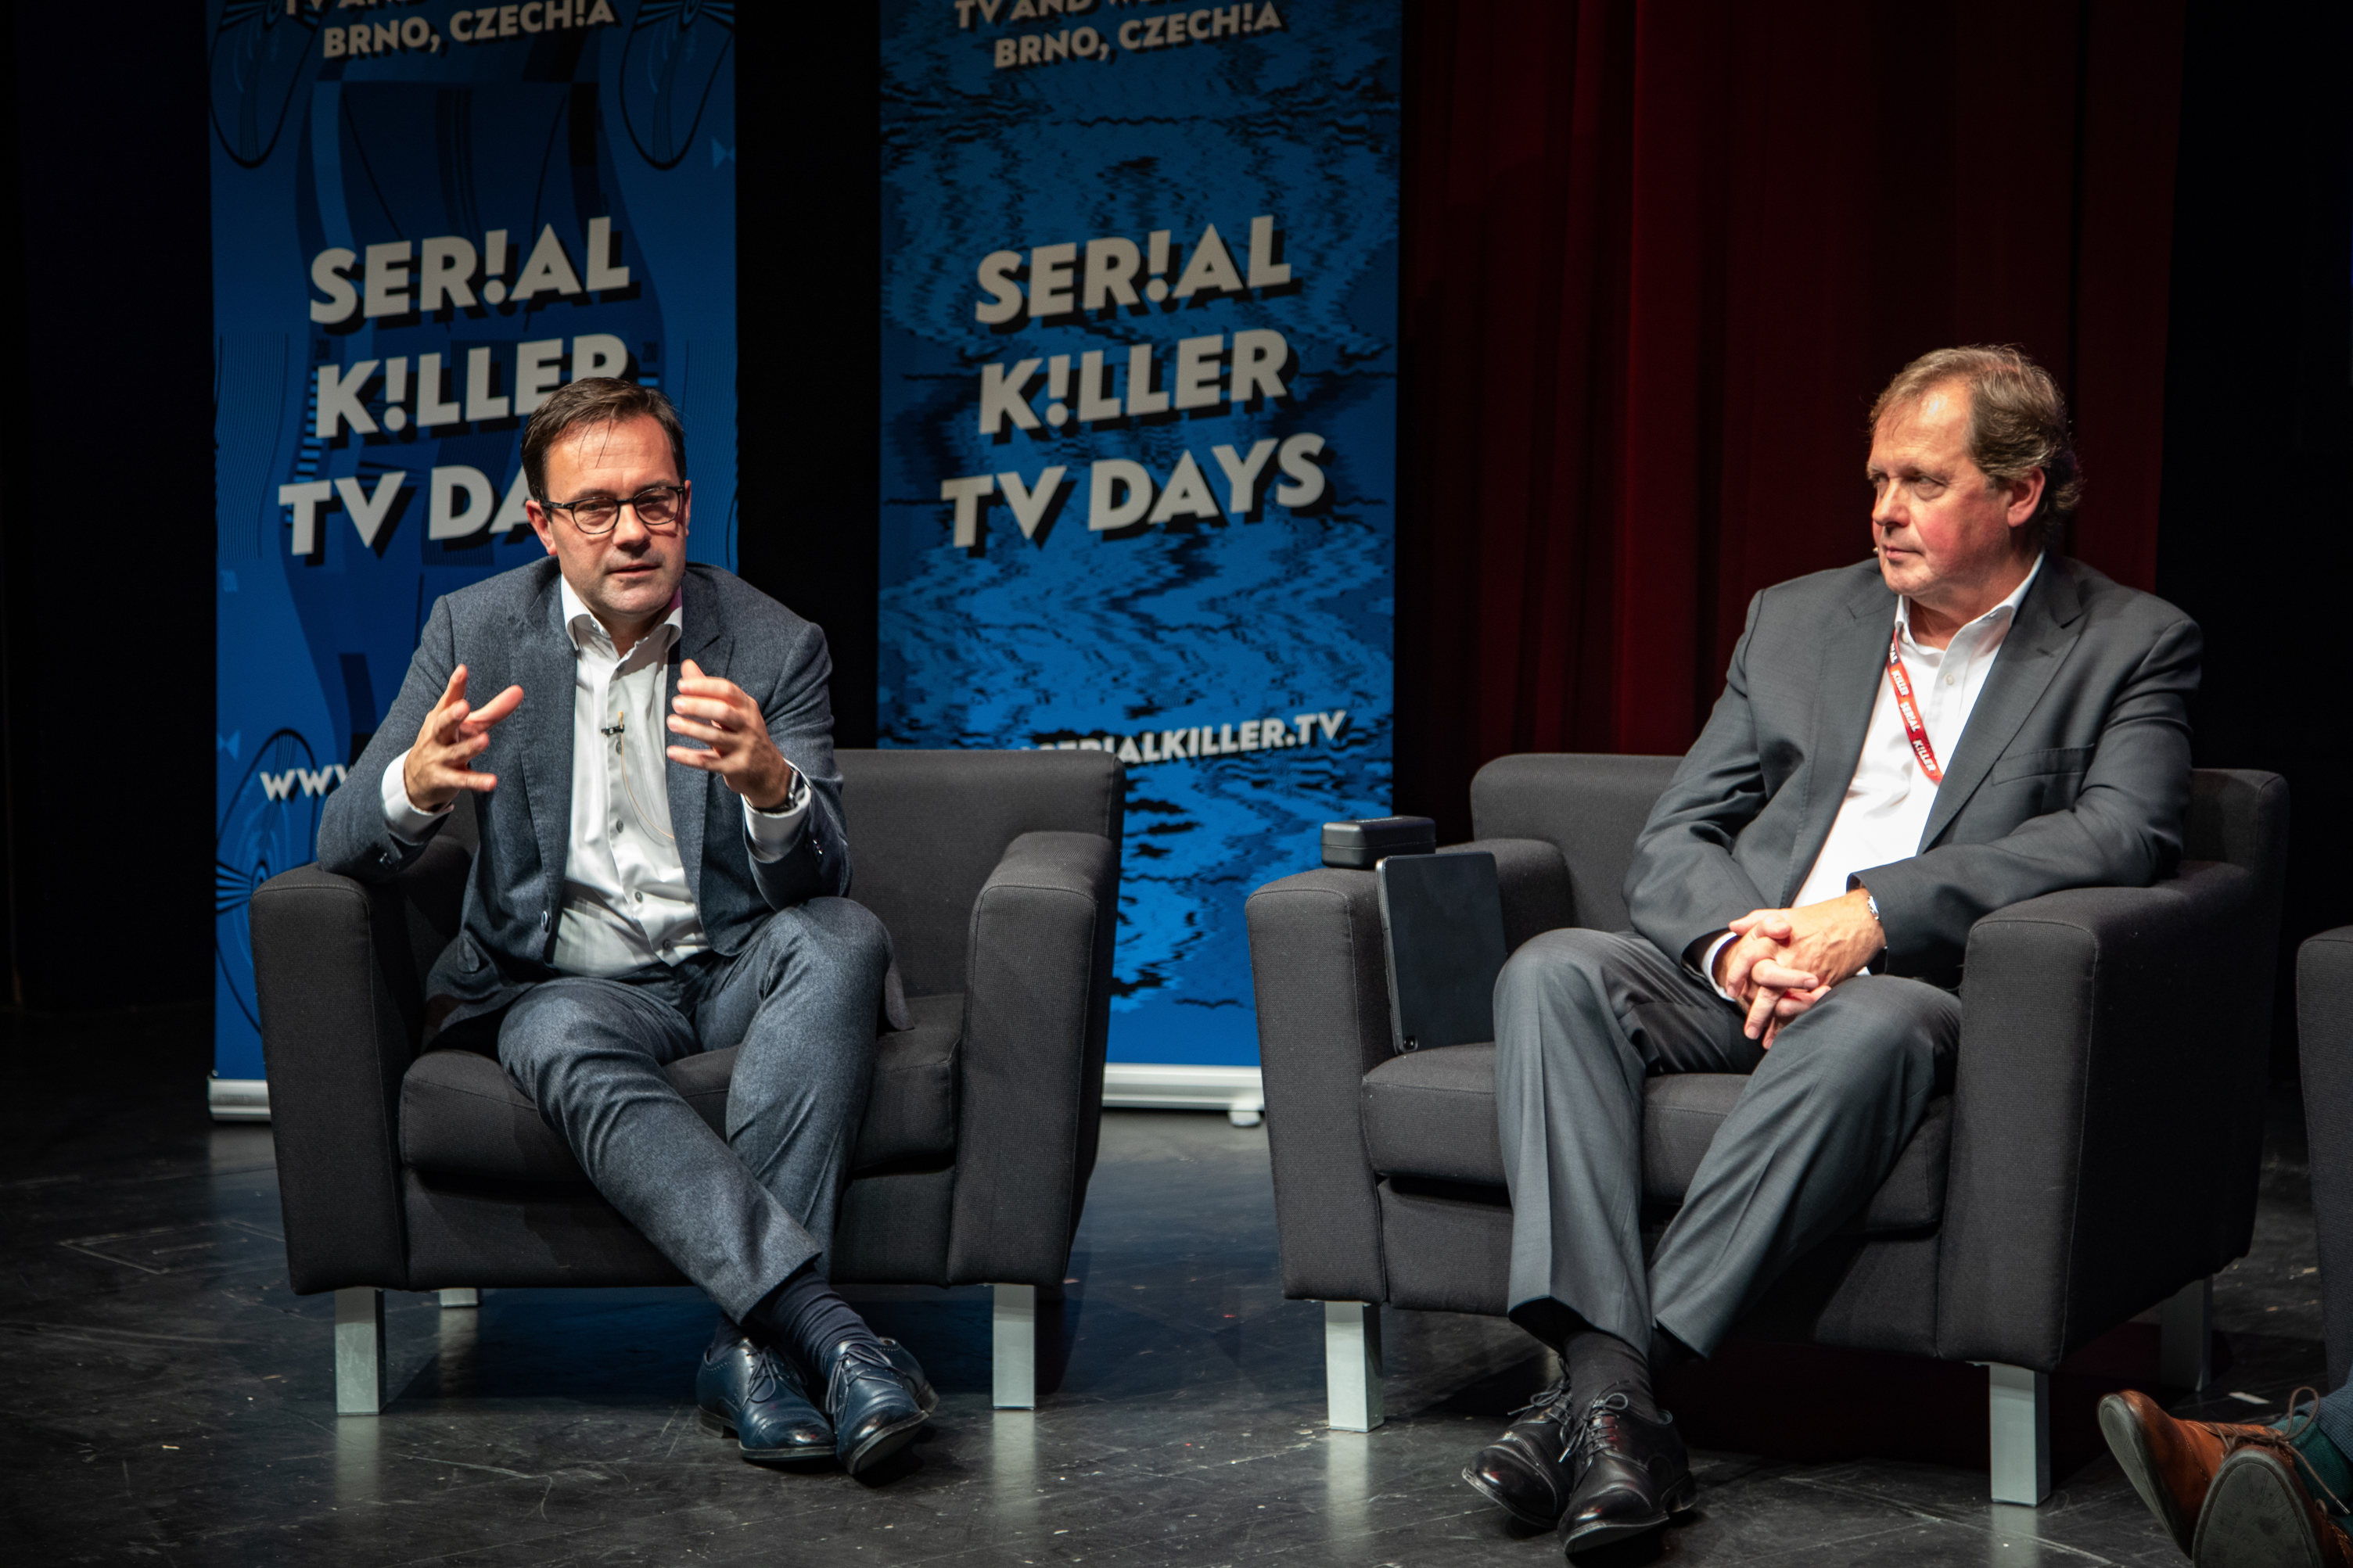 VRT CEO Frederik Delaplace in conversation with Petr Dvořák, CEO of Czech Television